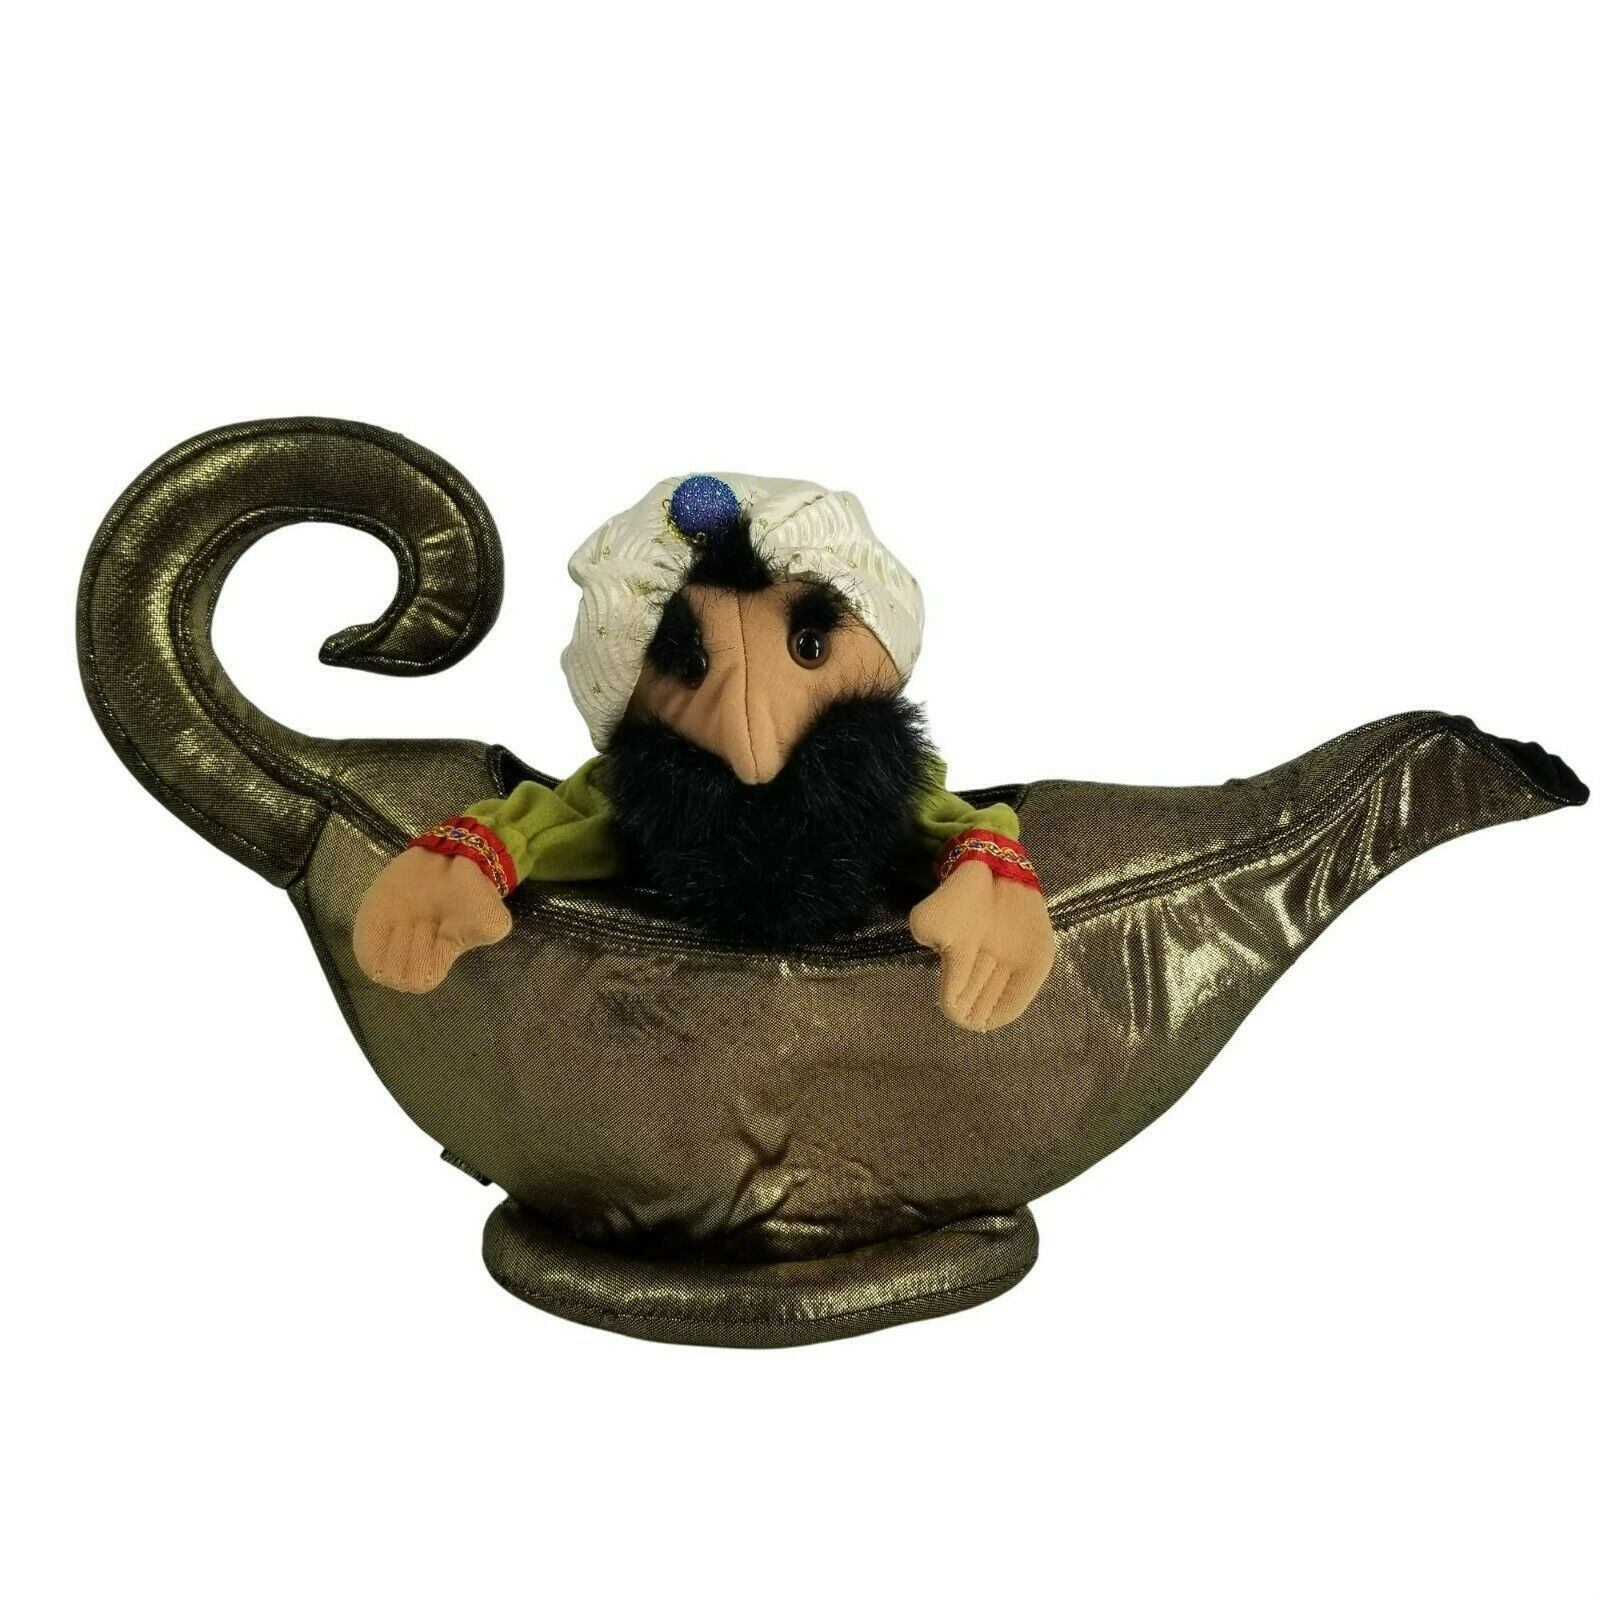 Primary image for Folkmanis Genie in Lamp Hand Puppet Lid Closes Gold Lamp Book Companion Kids